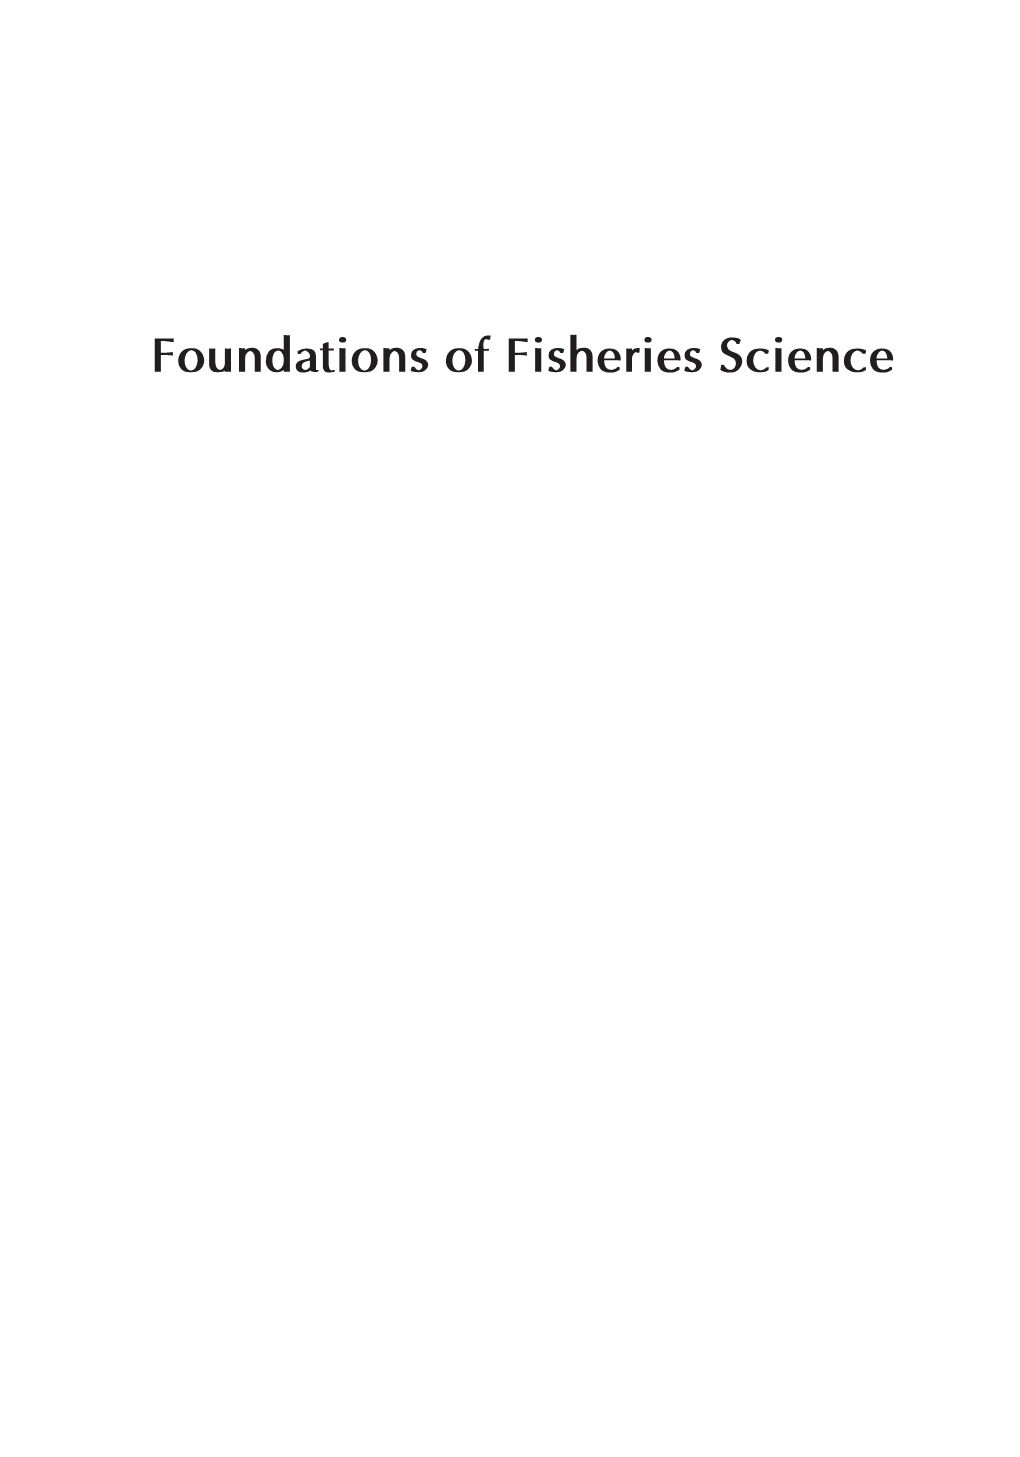 Foundations of Fisheries Science